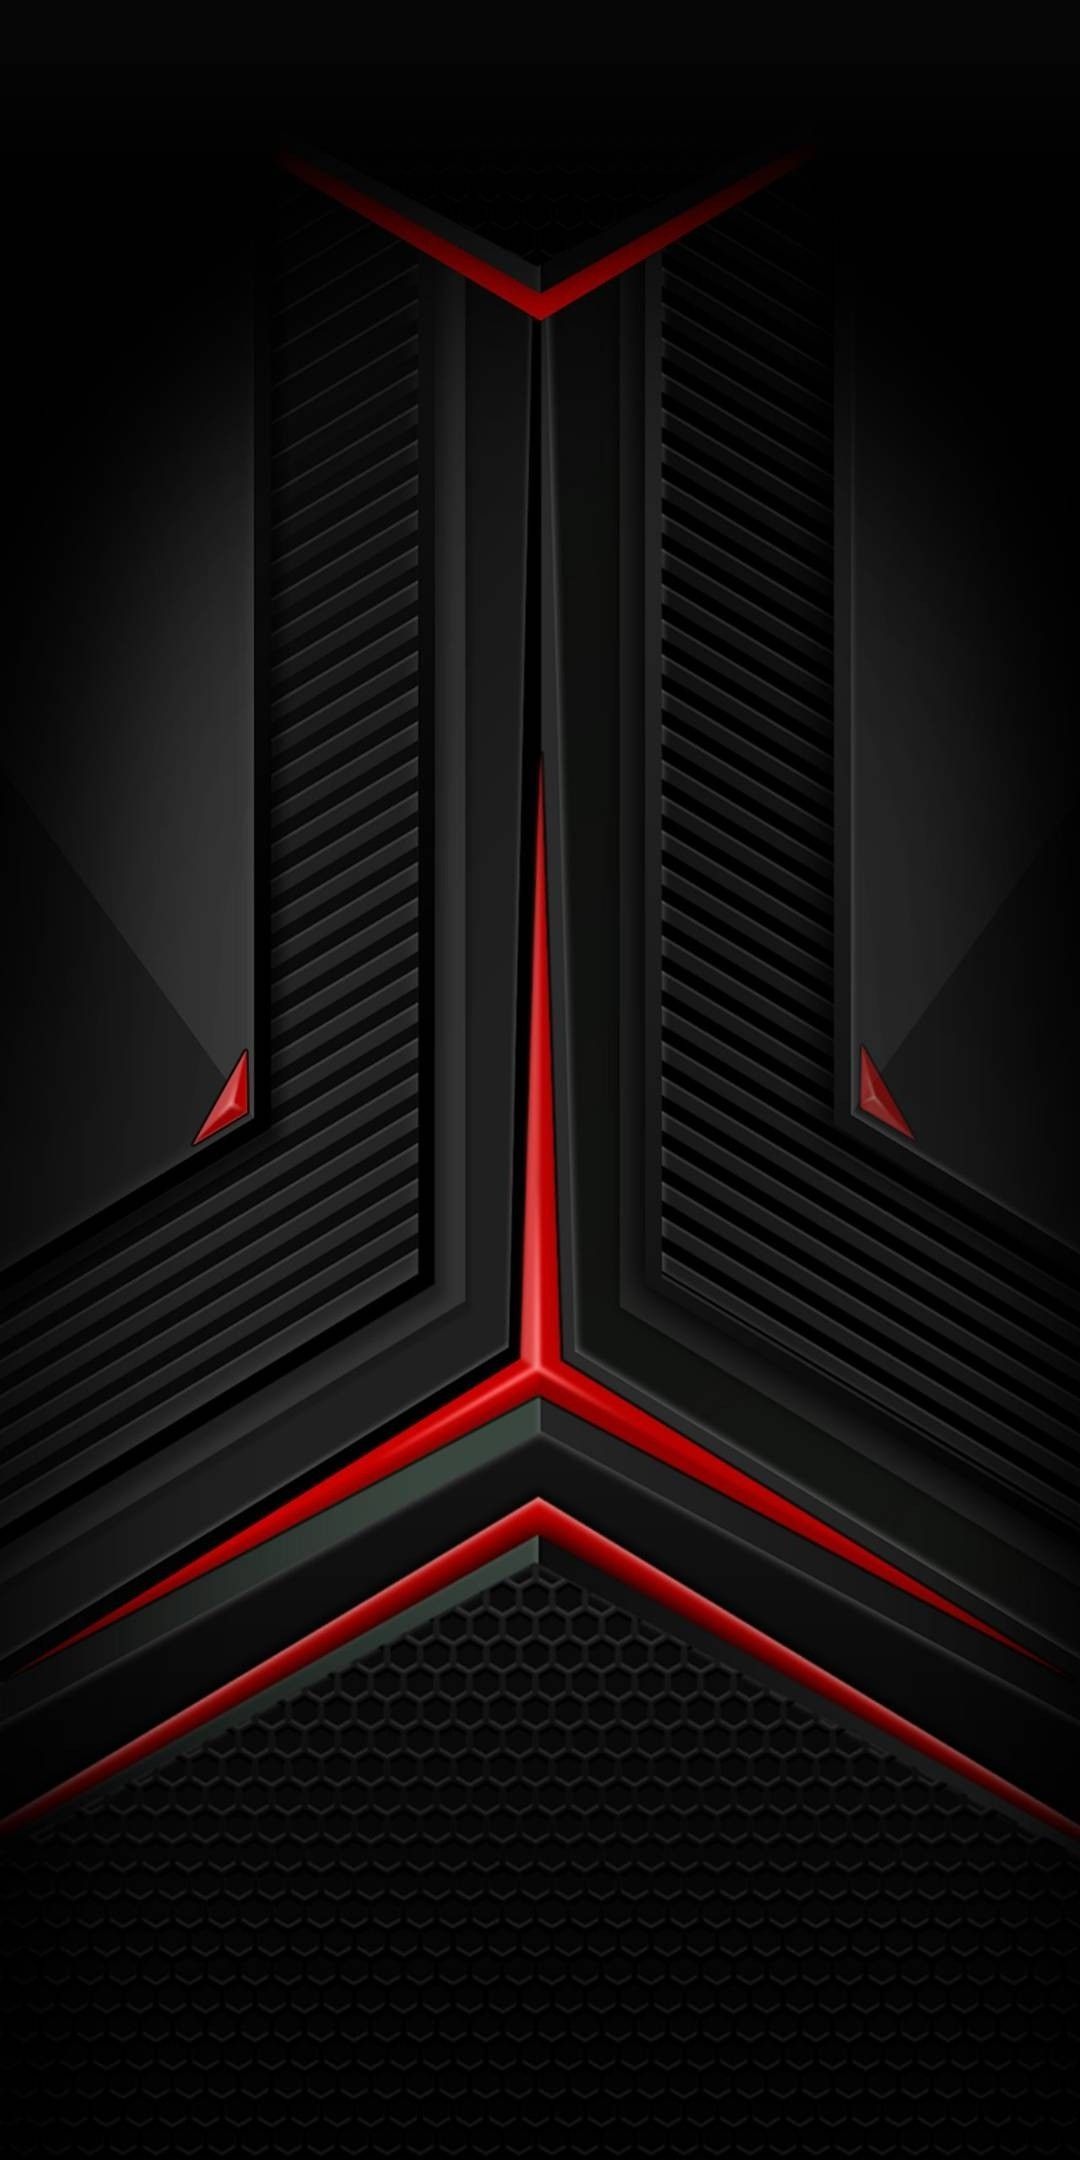 Cool wallpaper for phones. Red and black wallpaper, Cool wallpaper for phones, Dark phone wallpaper